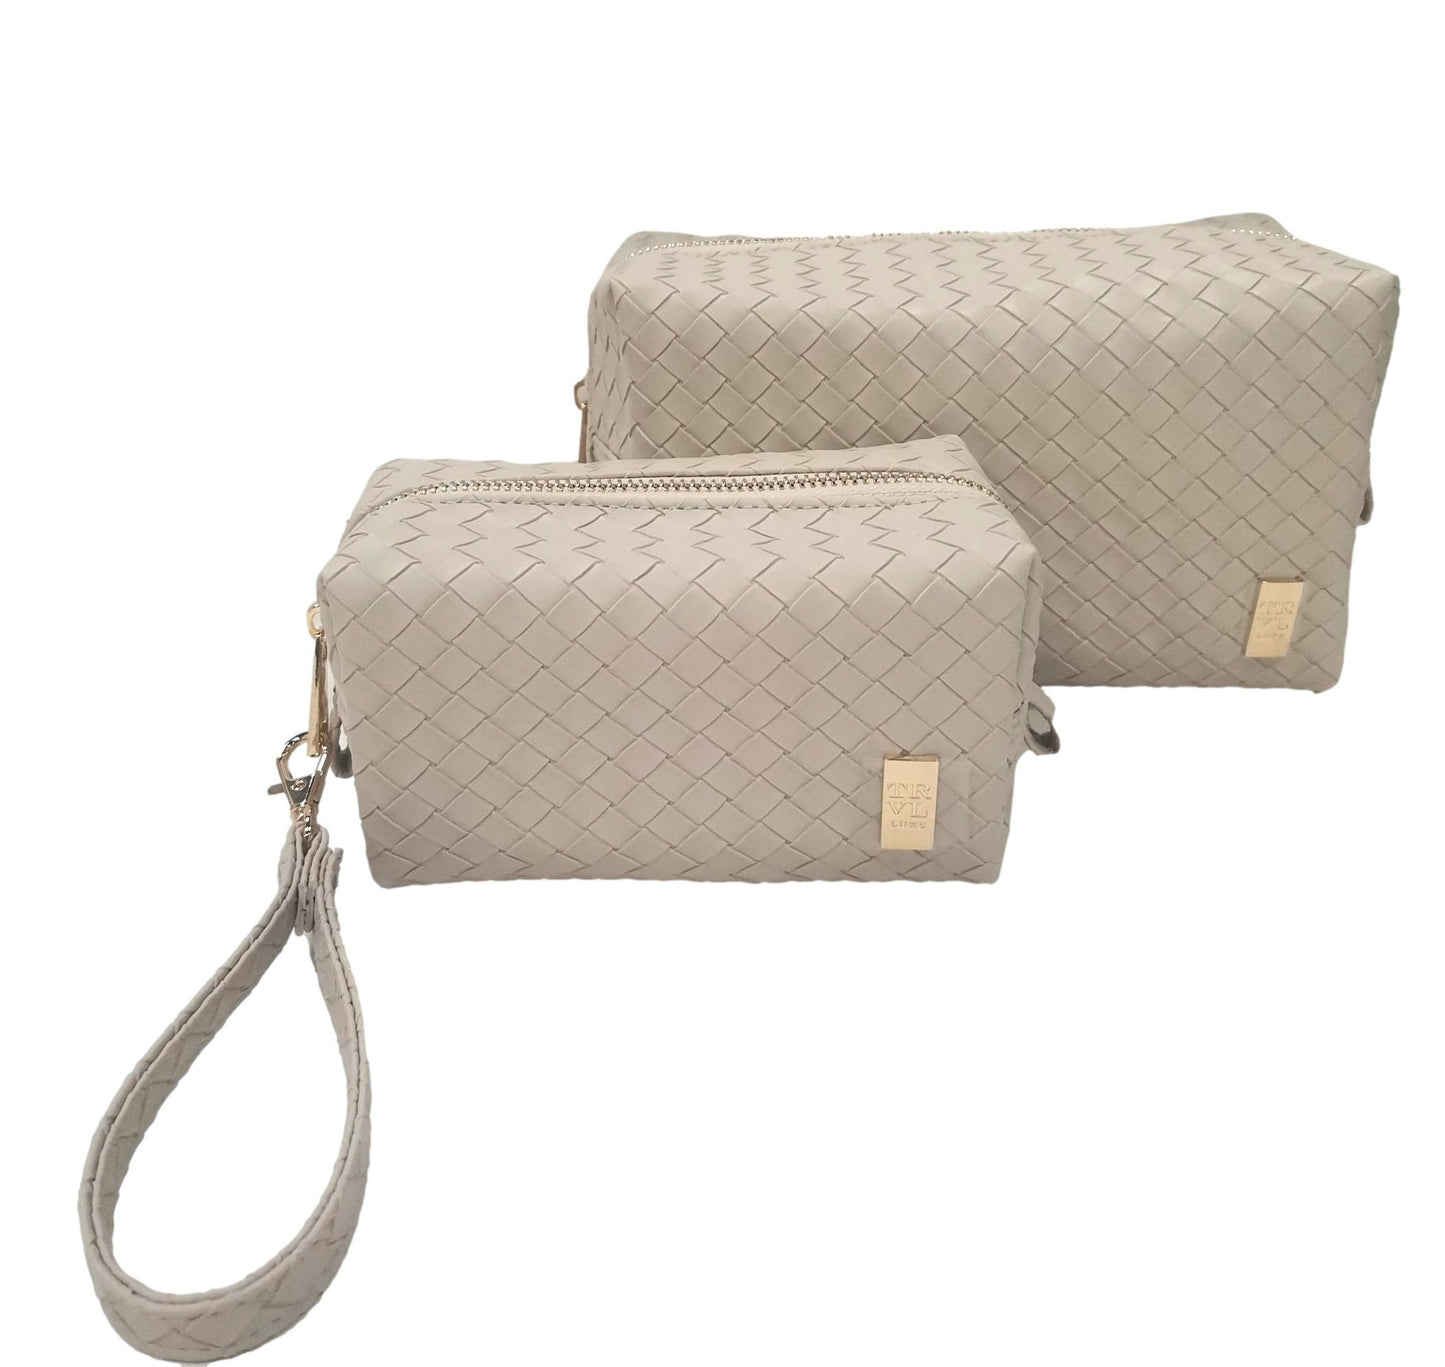 Luxe Dou Dome Bag Set-Trame Woven Bisque - Gaines Jewelers